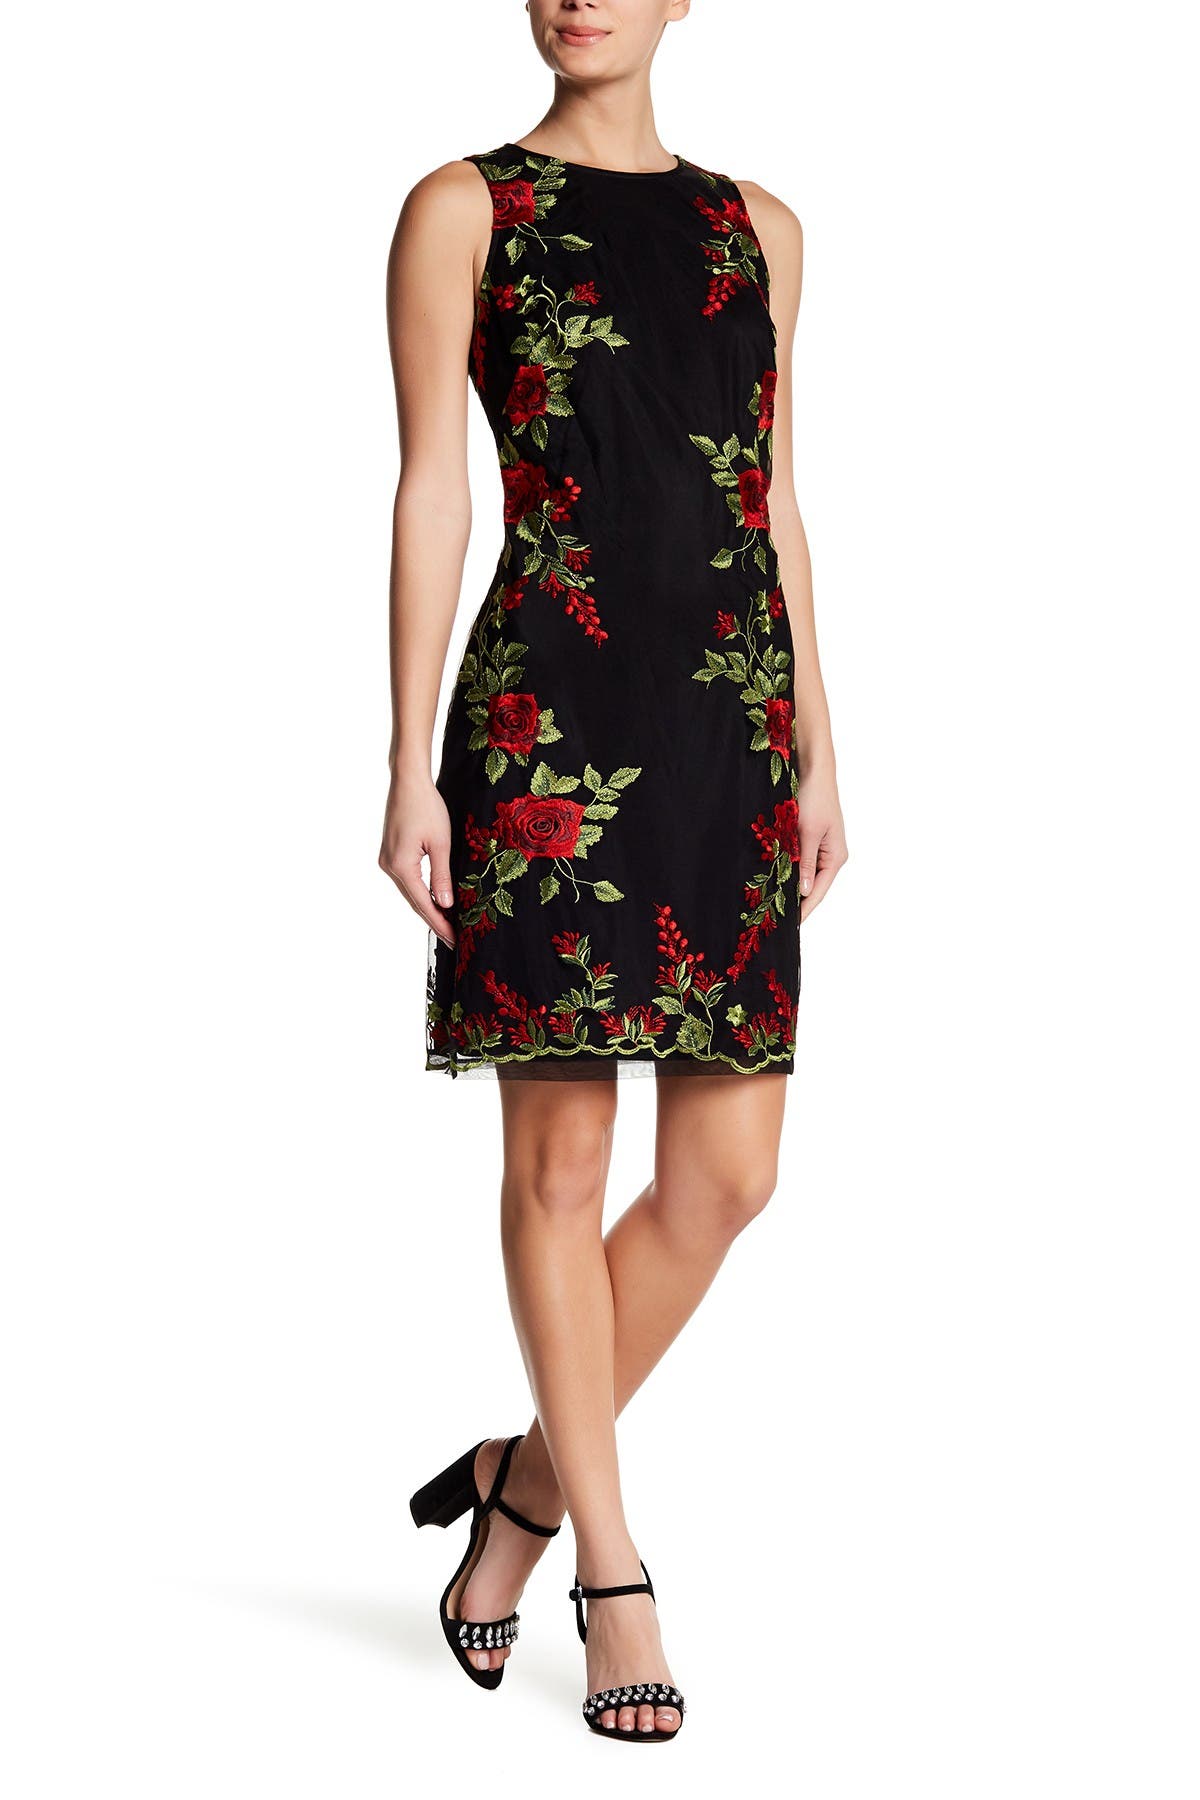 Donna Ricco | Embroidered Floral Sleeveless Dress | Nordstrom Rack